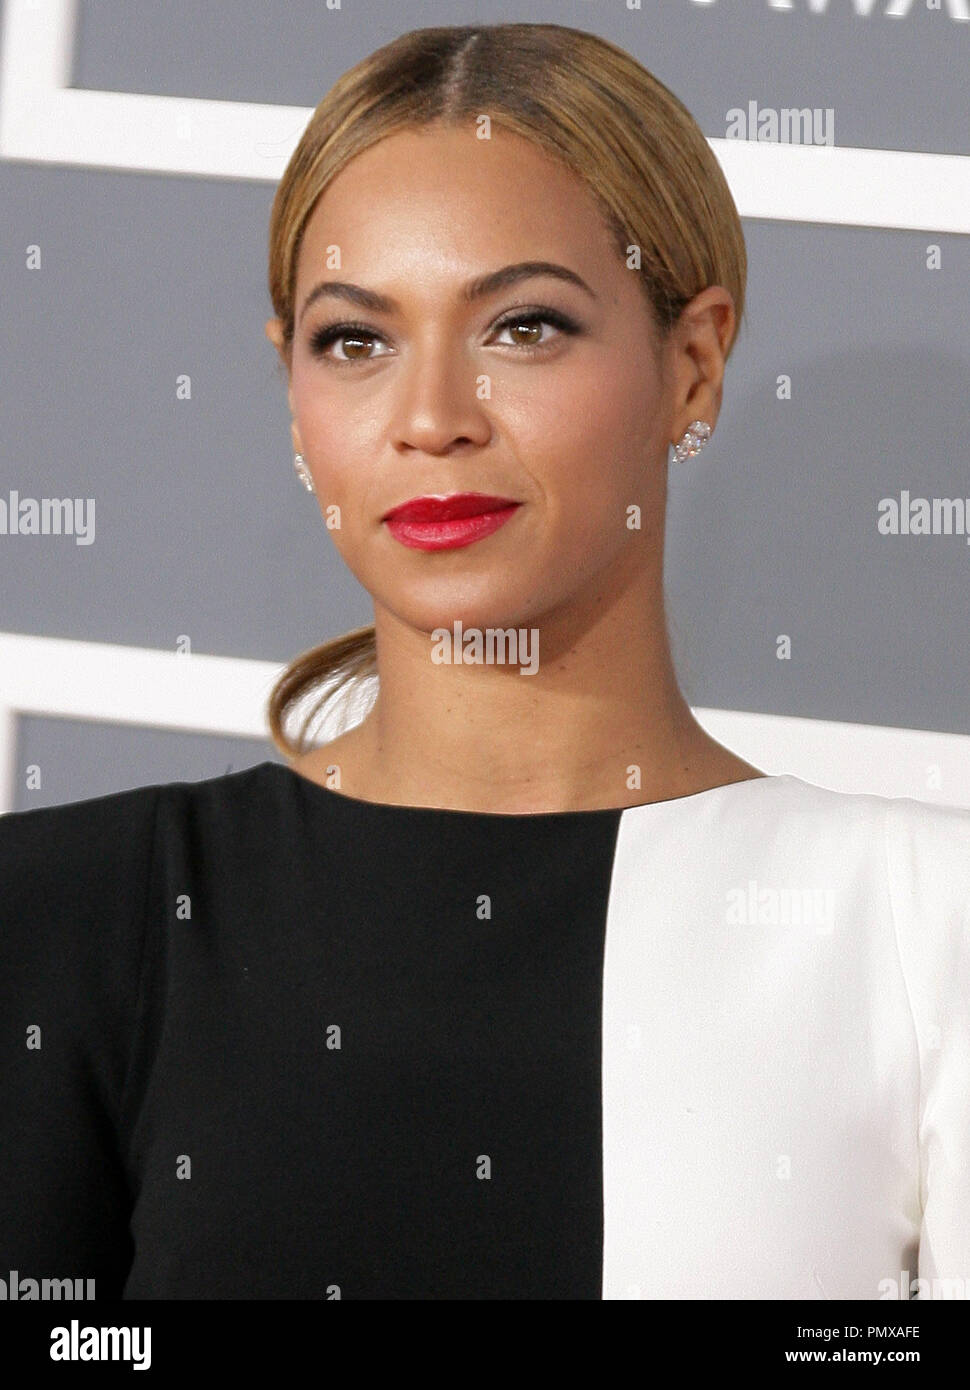 Beyonce at the 55th Annual Grammy Awards held at the Staples Center in Los Angeles, CA.The event took place on Sunday, February 10, 2013. Photo by PRPP / PictureLux  File Reference # 31836 023PRPP  For Editorial Use Only -  All Rights Reserved Stock Photo